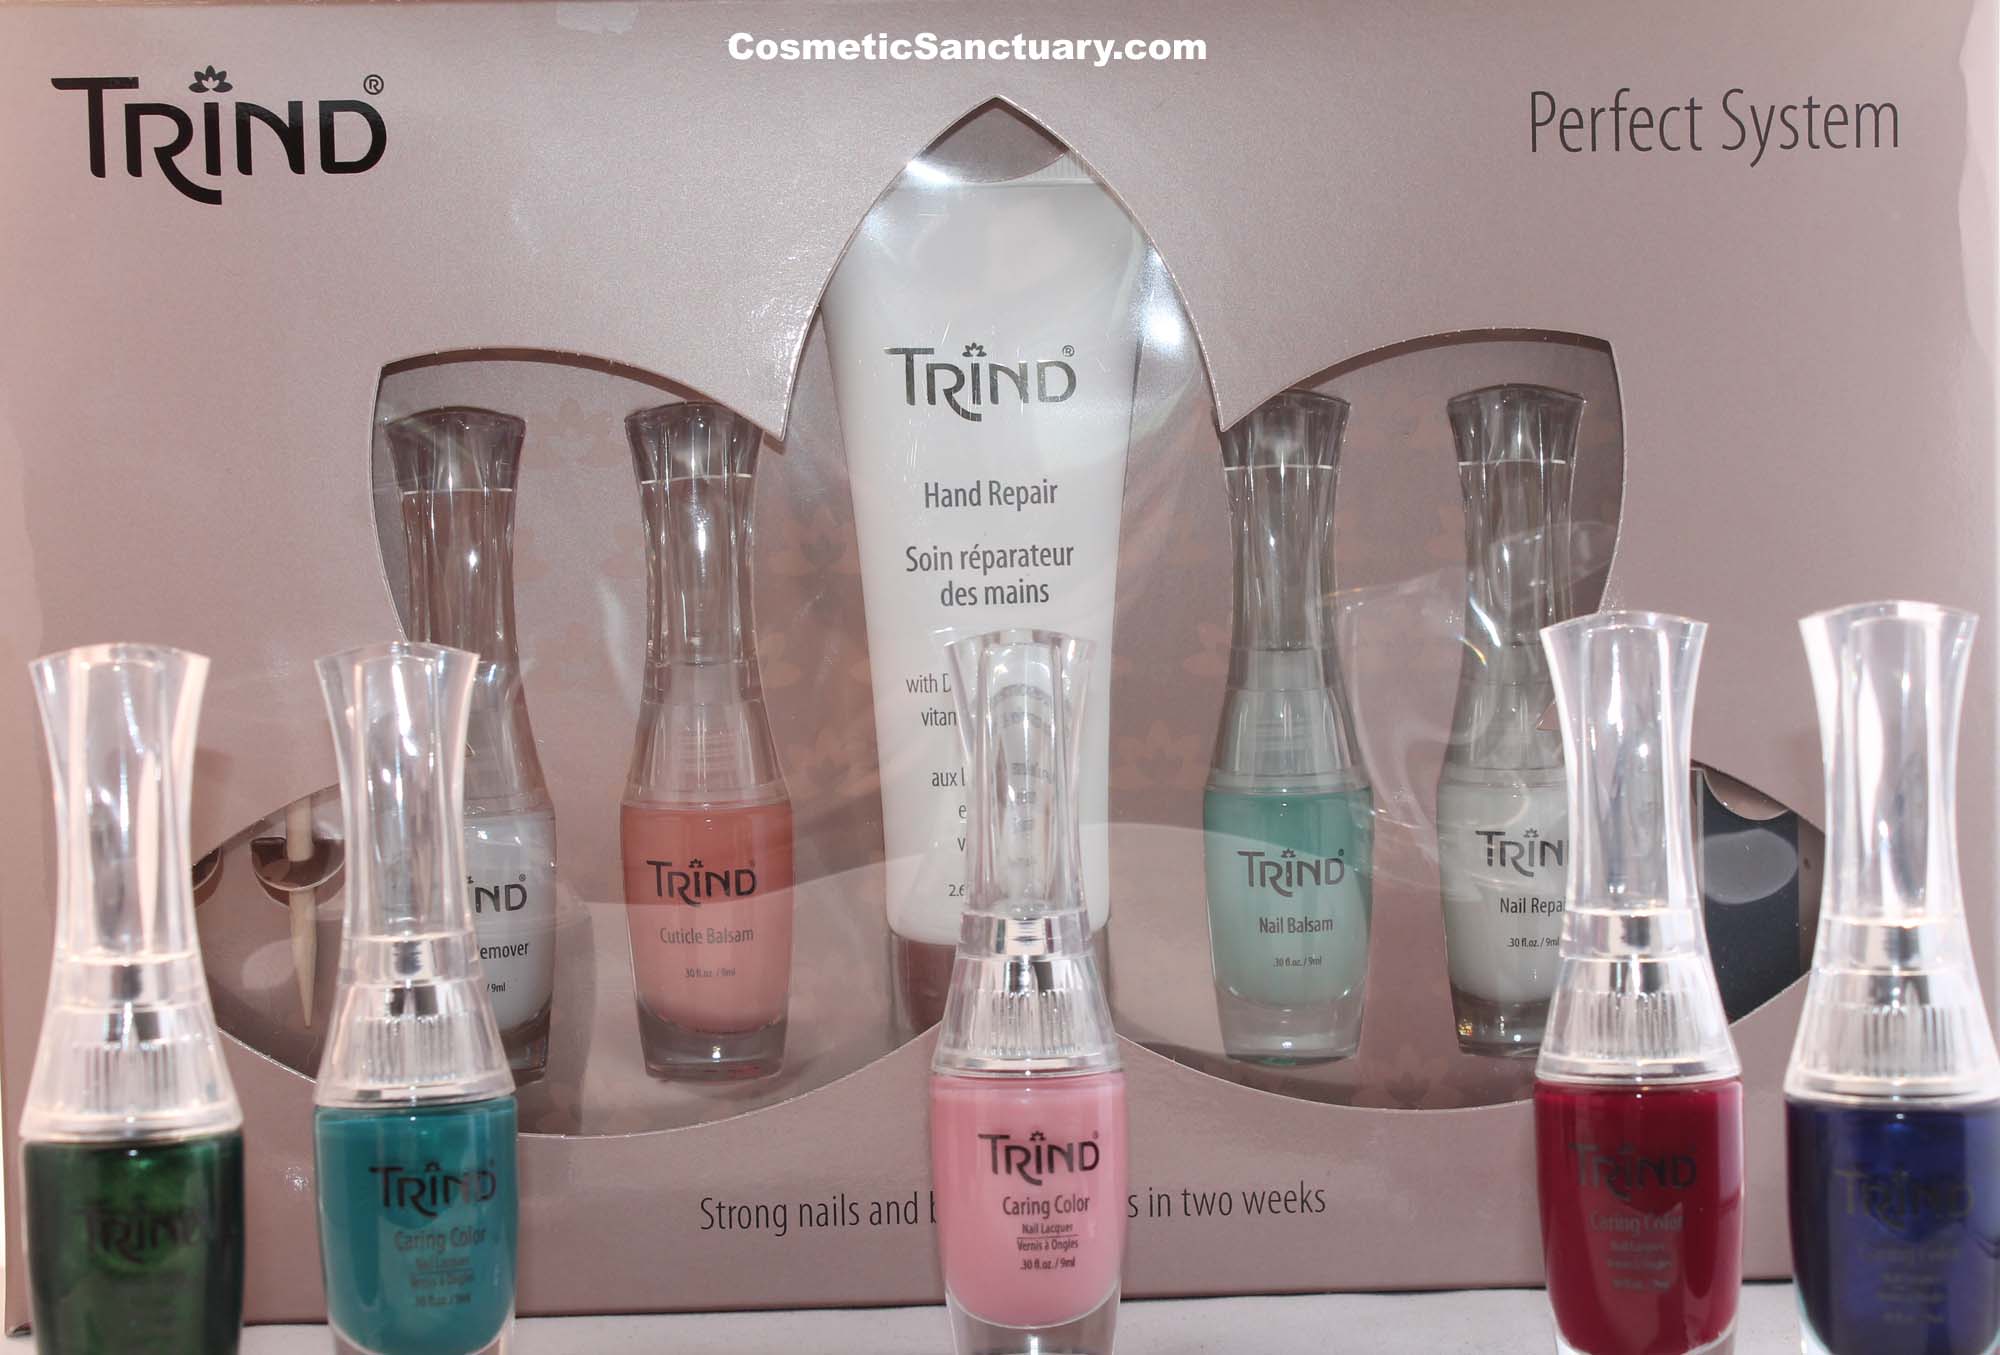 Each kit contains Extra Mild Cuticle Remover, Manicure Sticks,